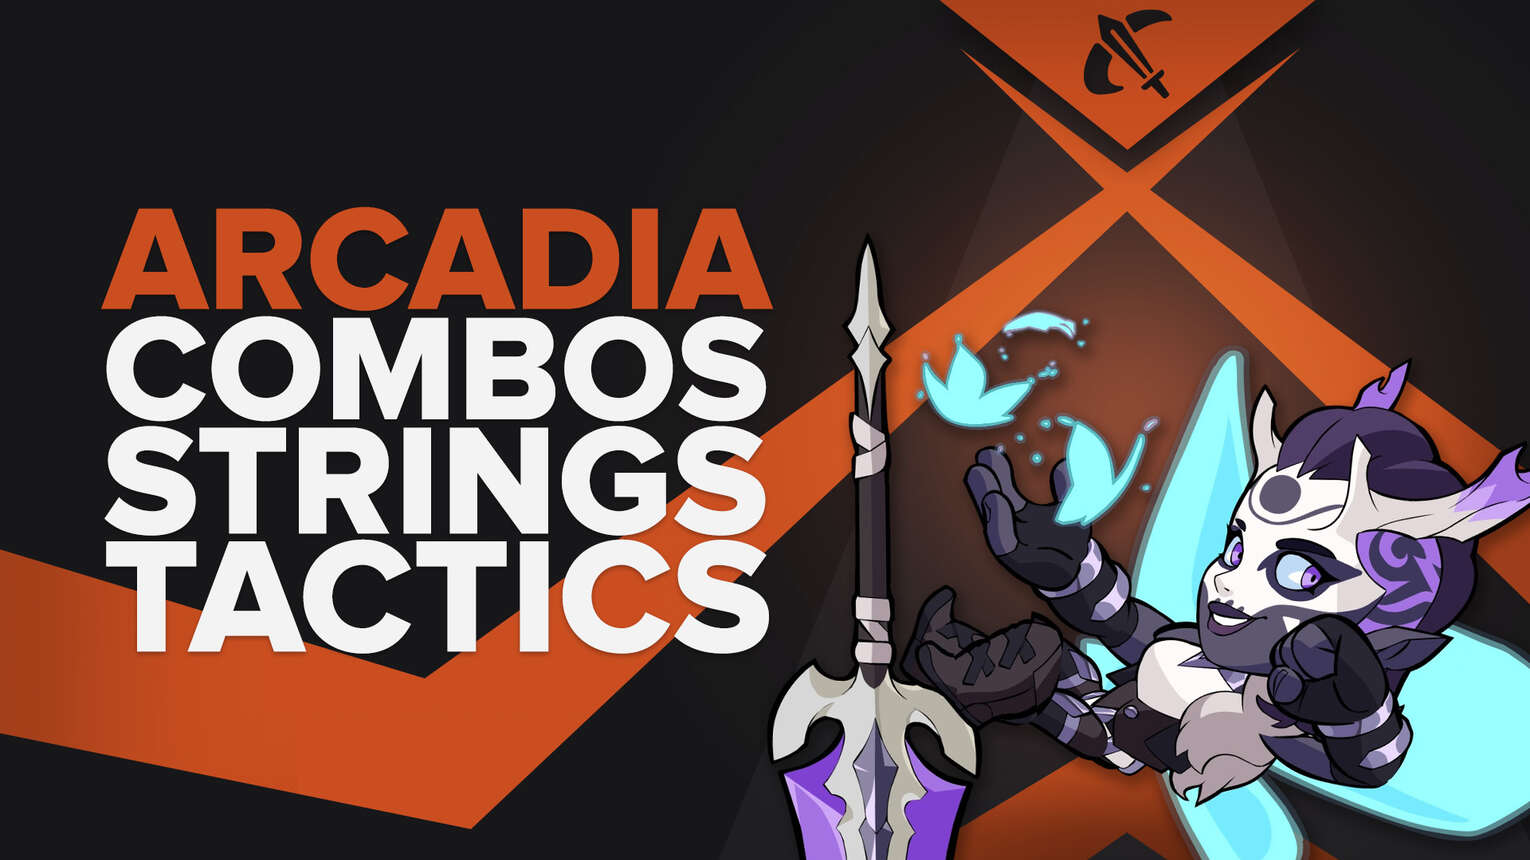 Best Arcadia combos, strings and tips in Brawlhalla